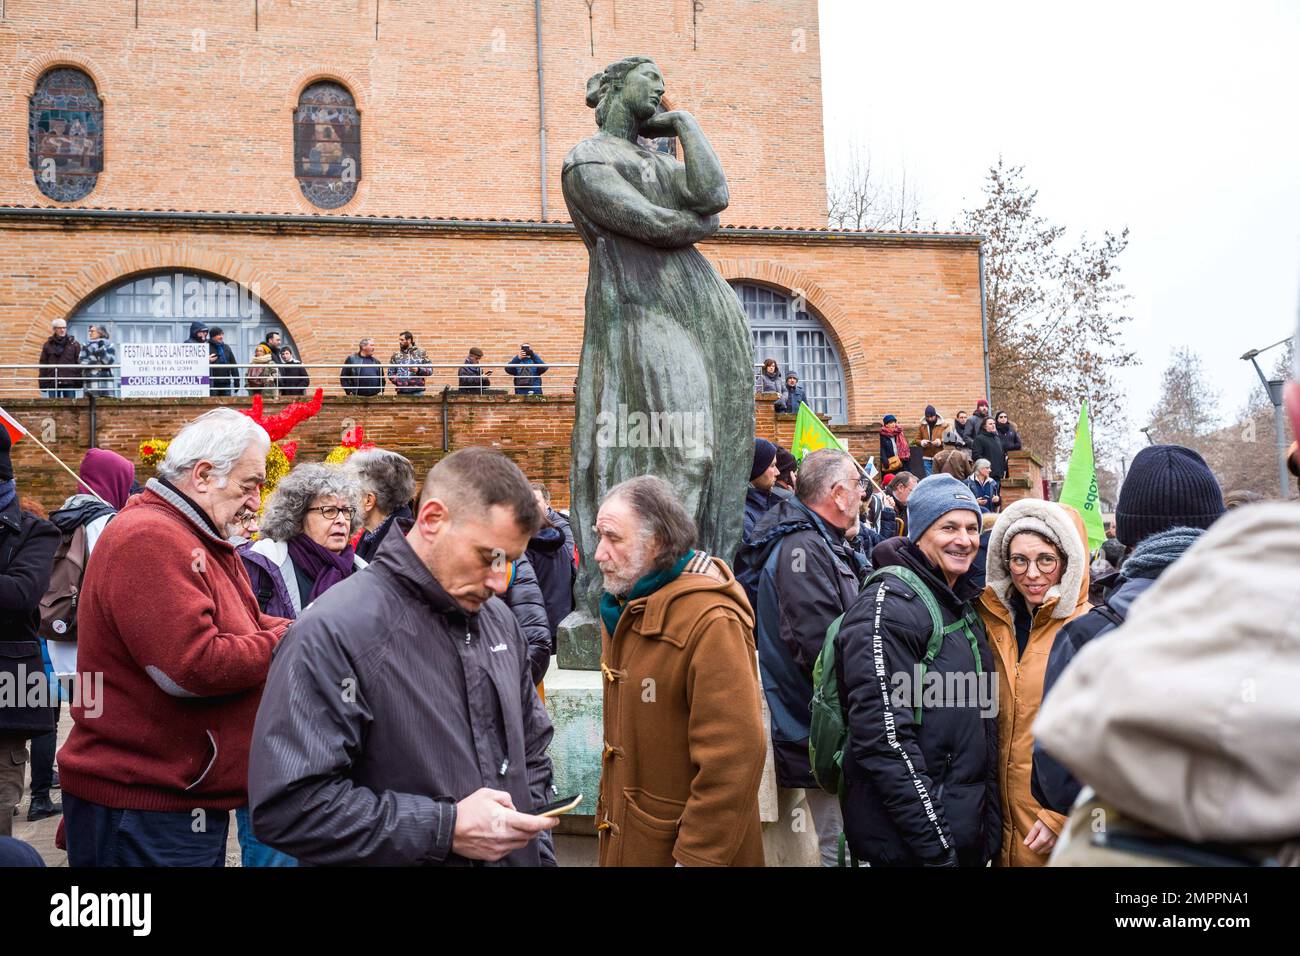 Demonstrators around the sculpture of Penelope by Emile-Antoine Bourdelle. Day of strike and demonstration called by the interunion (CFDT, CGT, FO, CFE-CGC, CFTC, Unsa, Solidaires, FSU), to protest against the government's plan to raise the legal retirement age from 62 to 64 years. France, Montauban on January 31, 2023. Photo by Patricia Huchot-Boissier/ABACAPRESS.COM Stock Photo